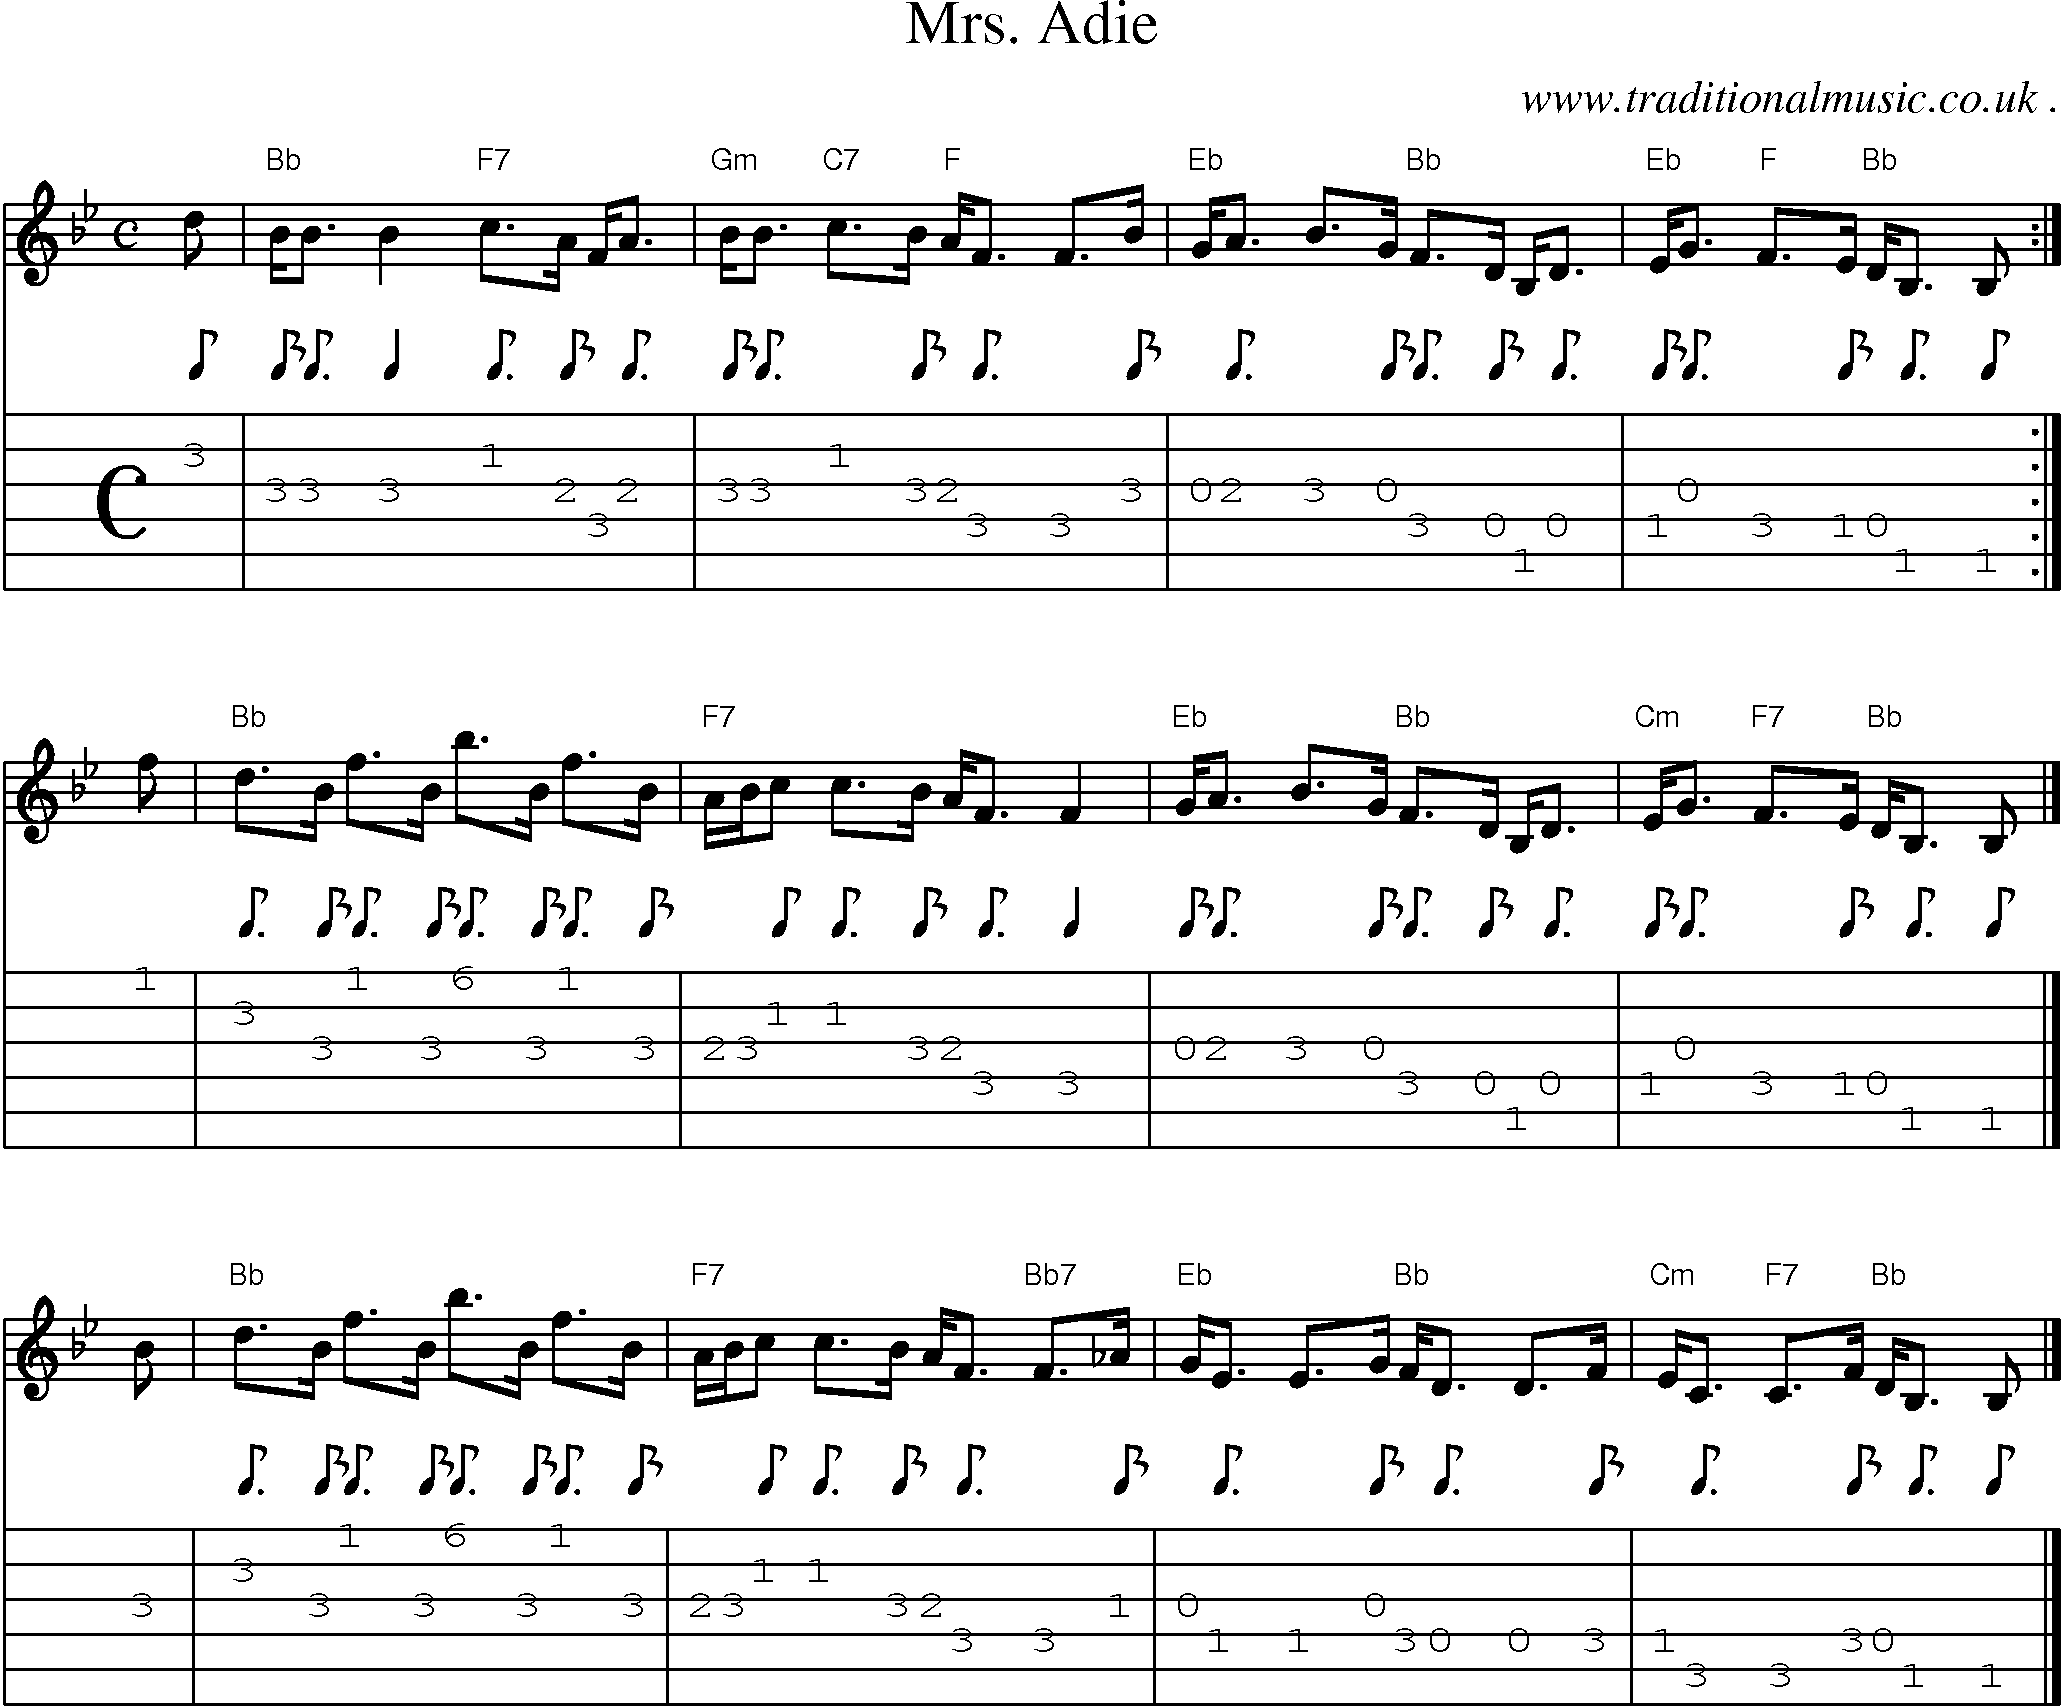 Sheet-music  score, Chords and Guitar Tabs for Mrs Adie